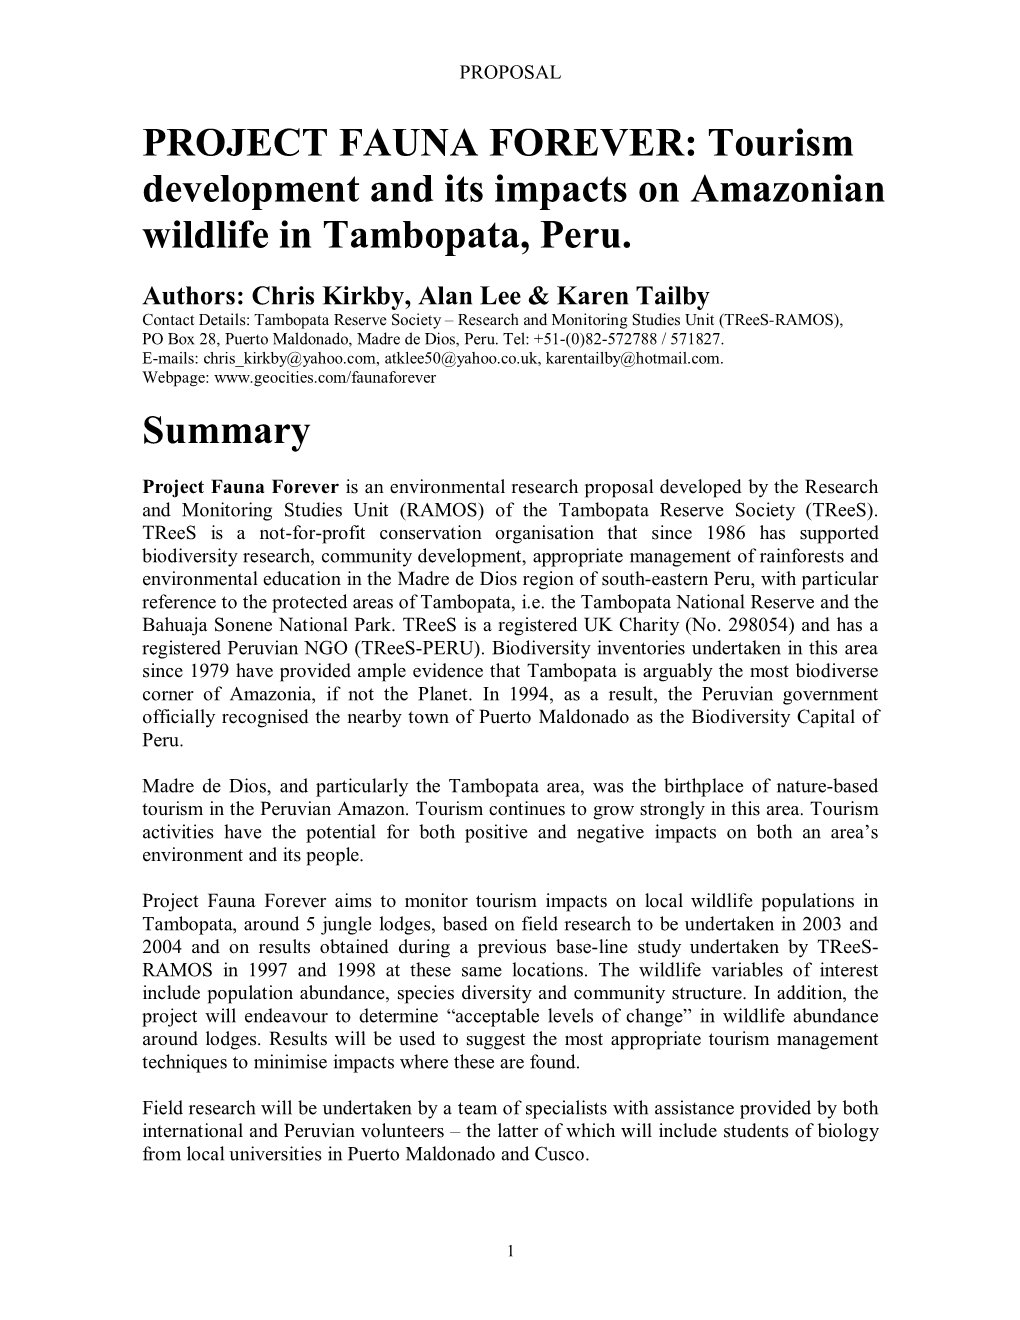 PROJECT FAUNA FOREVER: Tourism Development and Its Impacts on Amazonian Wildlife in Tambopata, Peru